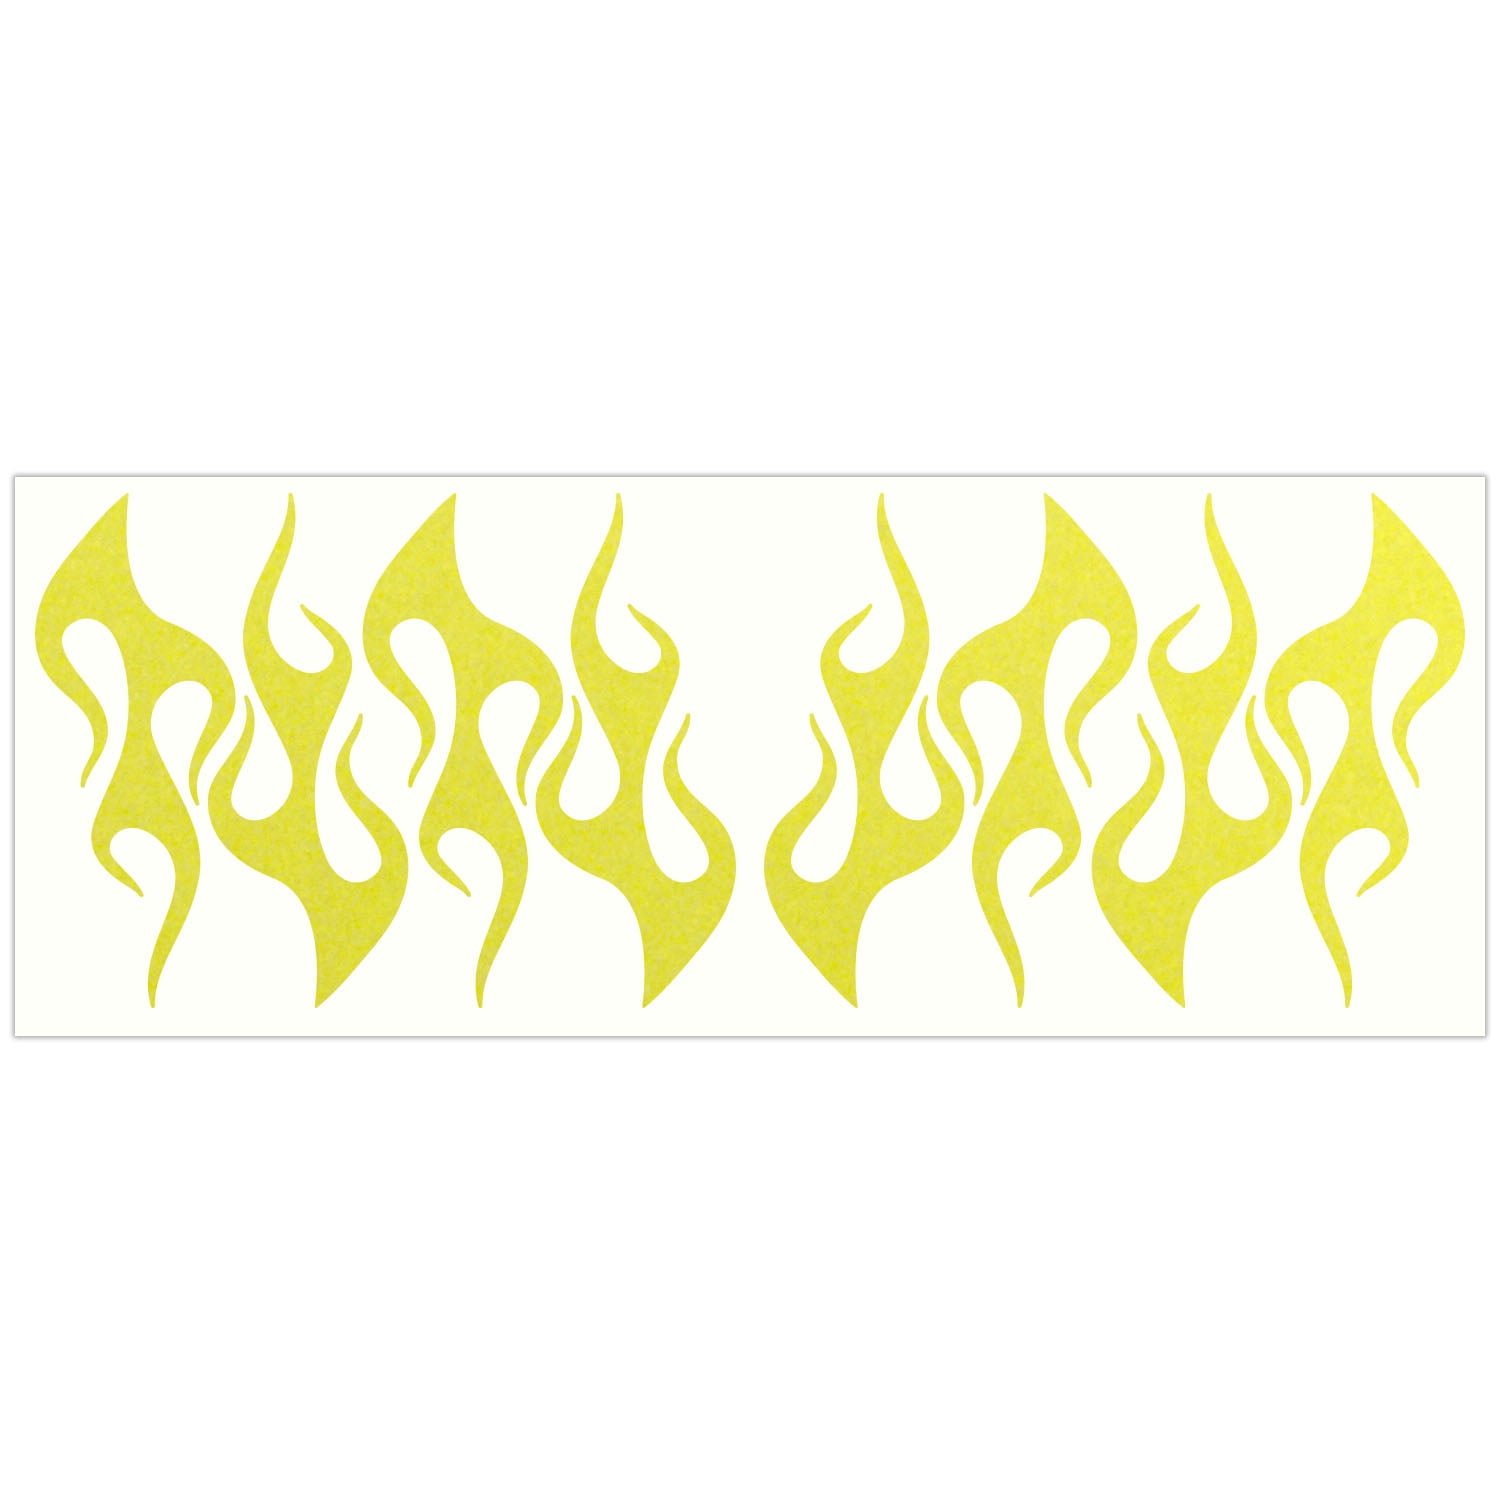 Wheelchairs and More Bicycles Strollers LiteMark Reflective Assorted 4 Inch Flames Sticker Decals for Helmets Pack of 9 